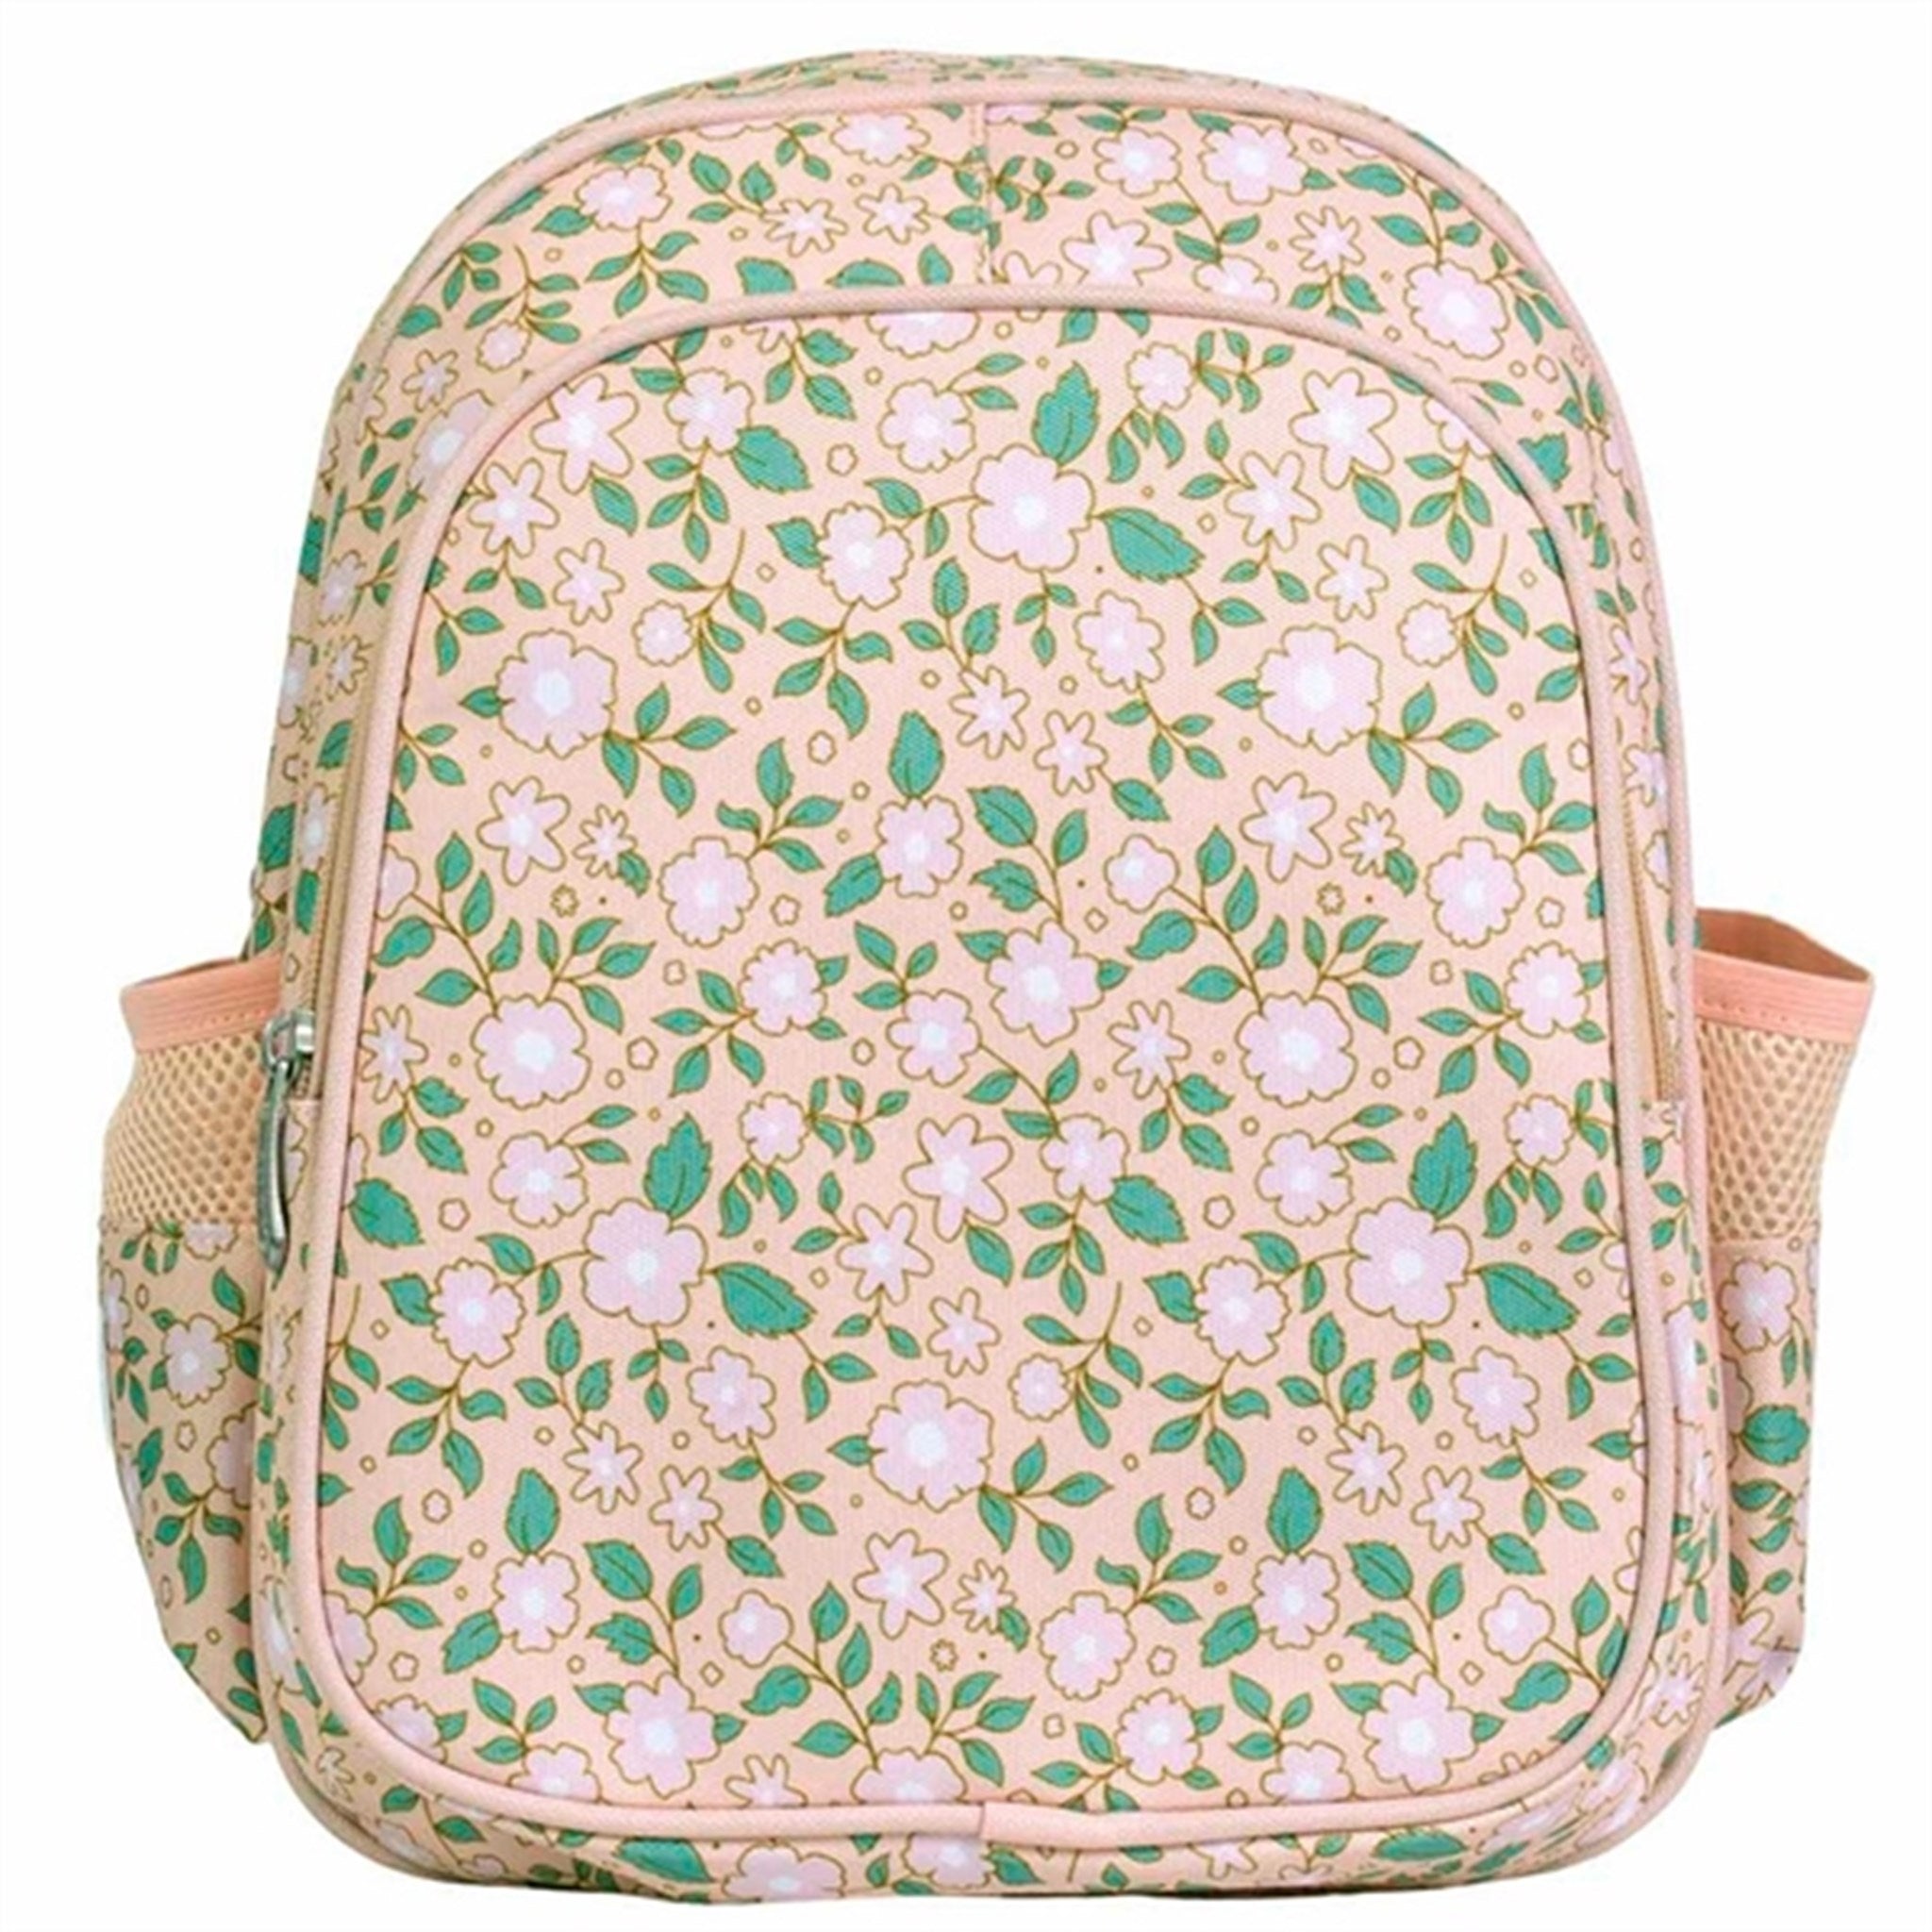 A Little Lovely Company Backpack Blossom Pink